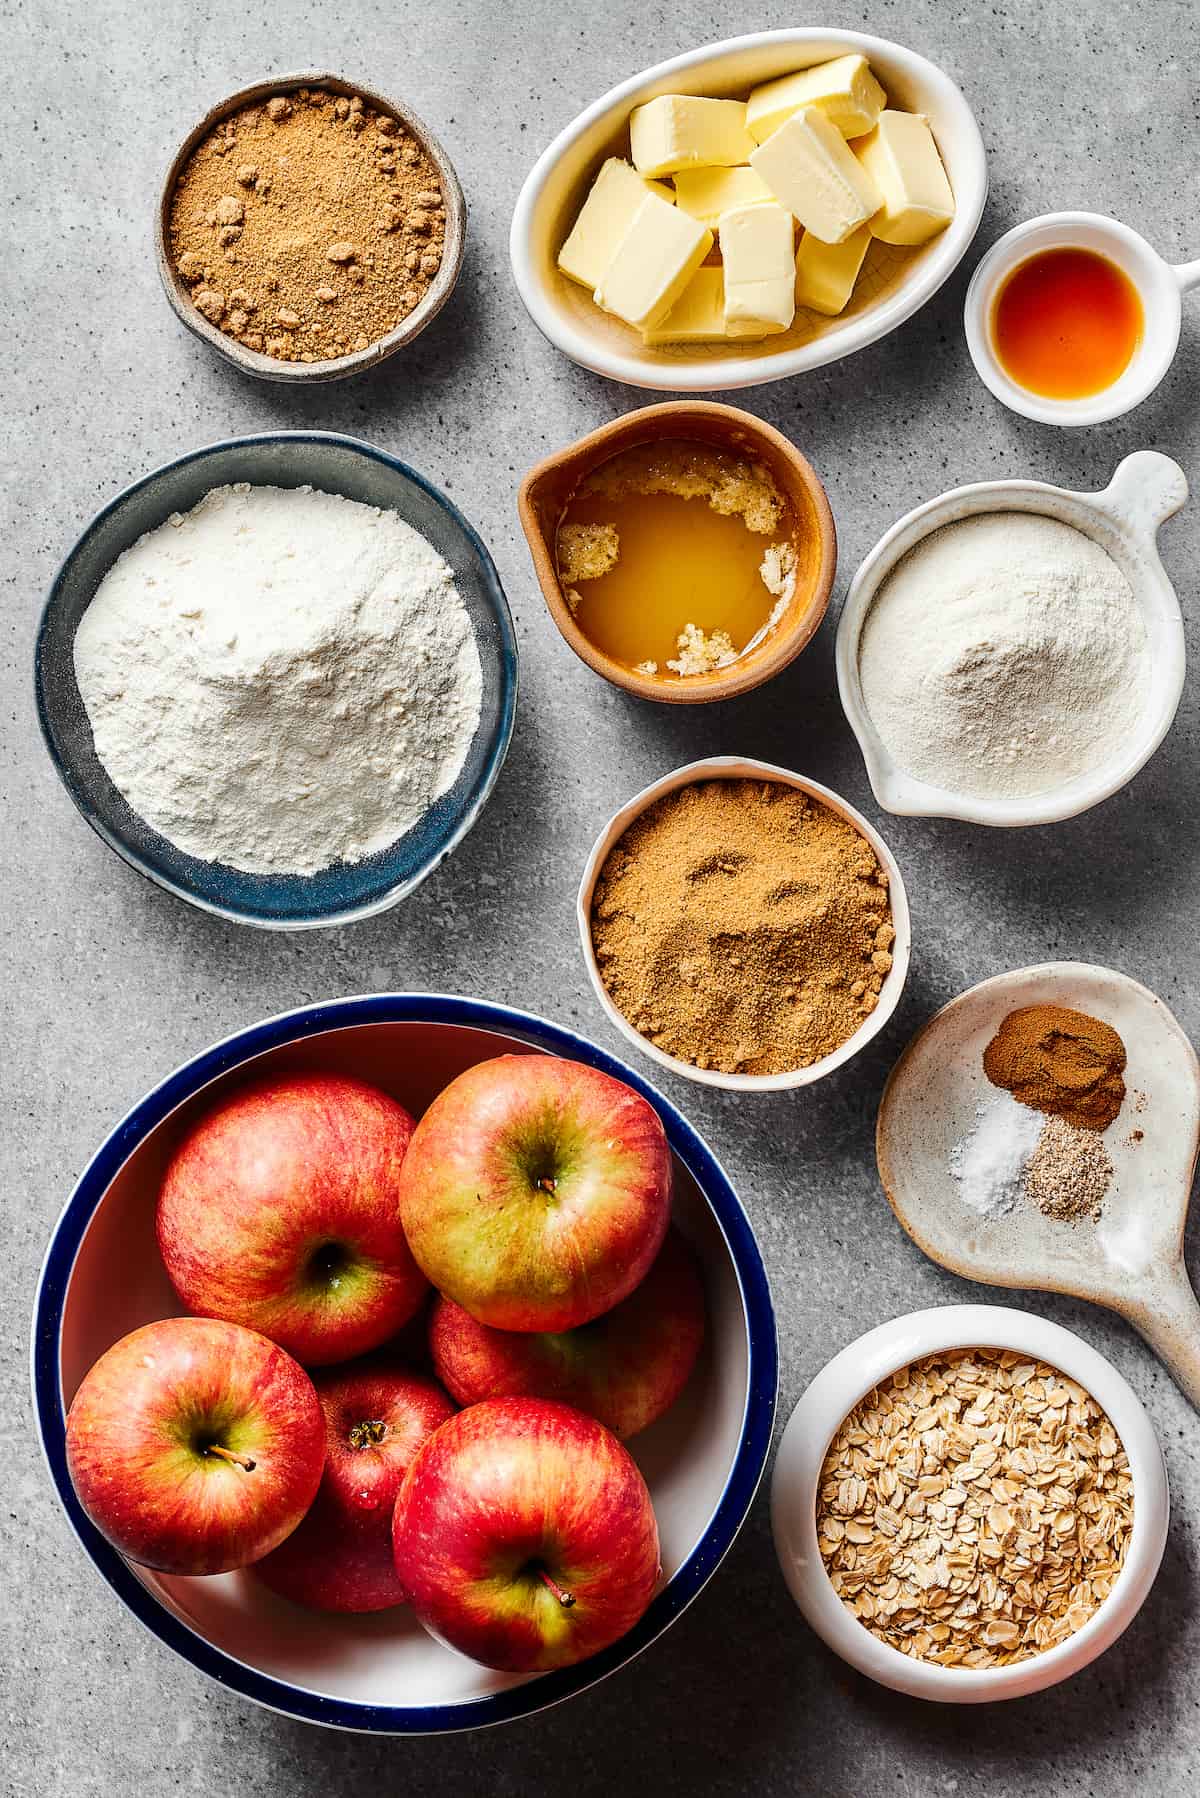 From top left: Brown sugar, butter, vanilla, flour, melted butter, additional flour, additional brown sugar, spices, apples, oats.